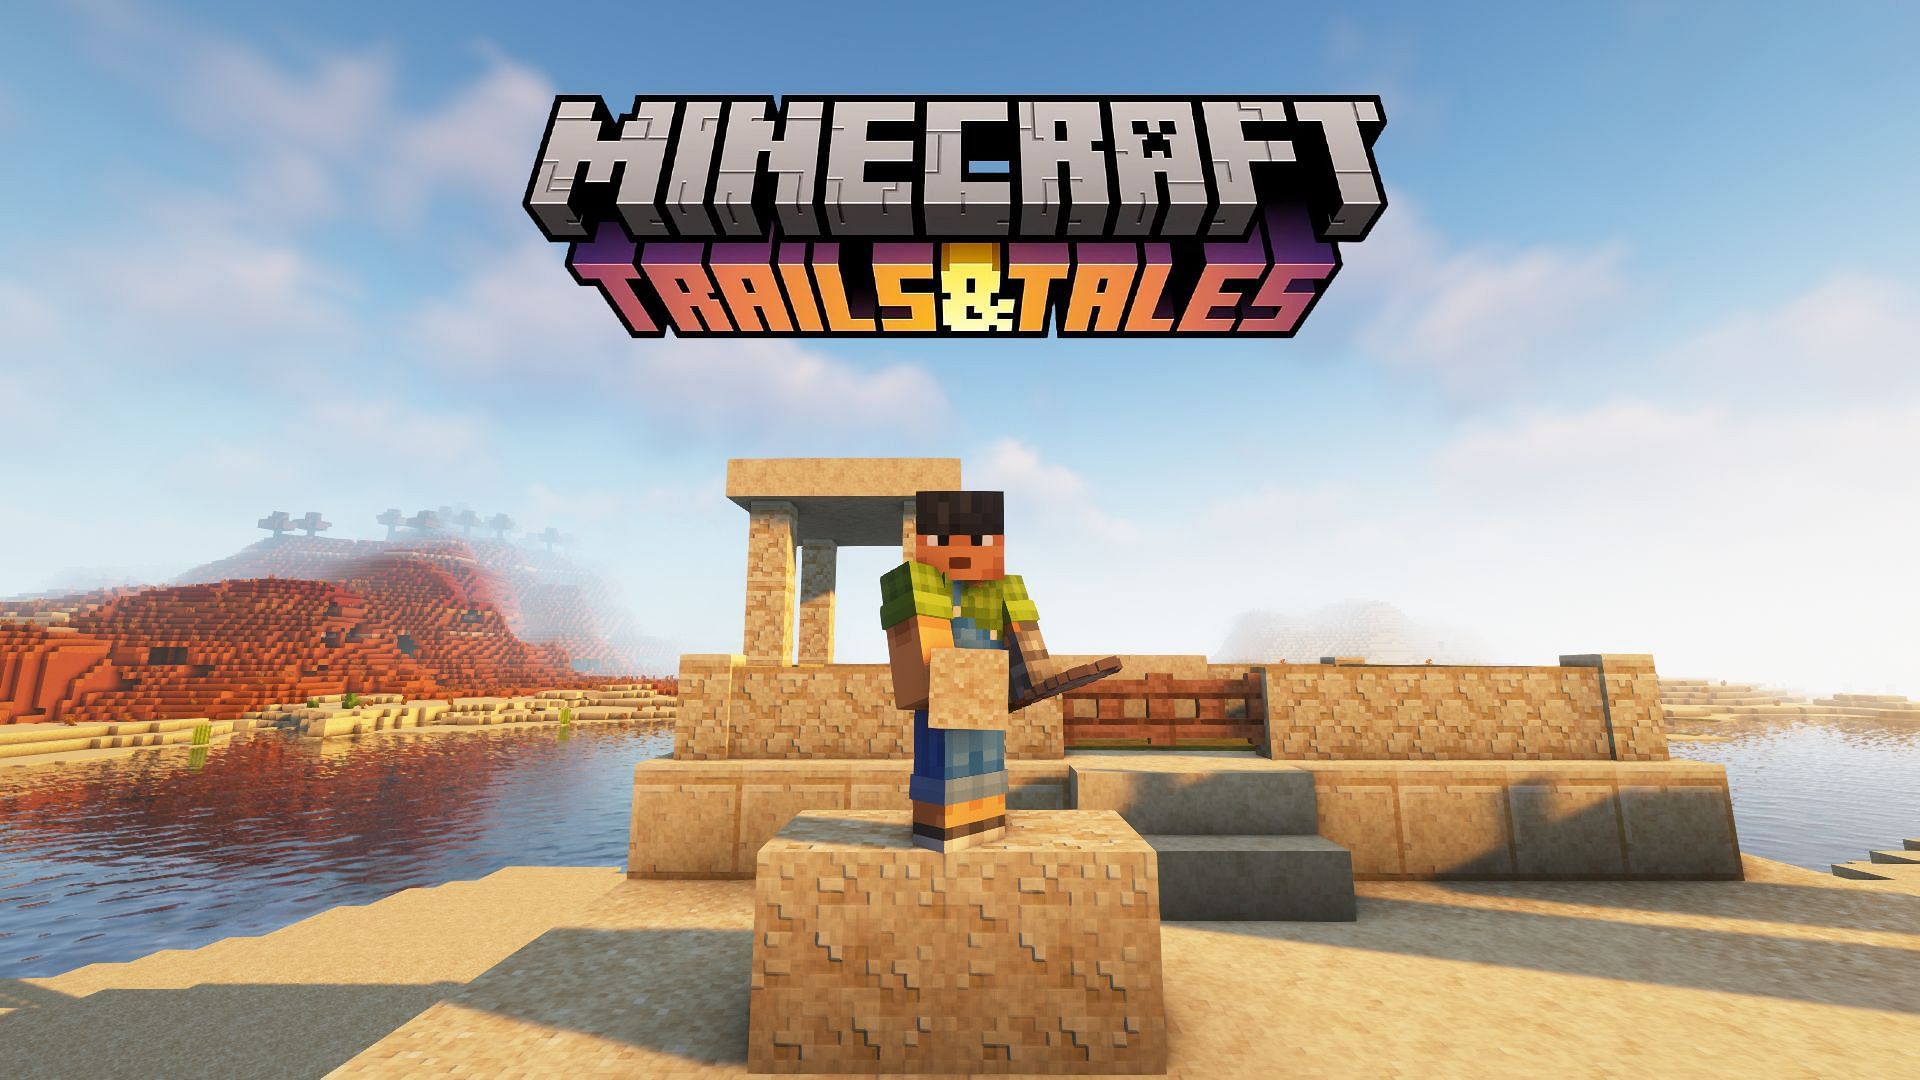 Suspicious sand in Minecraft Trails &amp; Tales update (Image via Mojang)